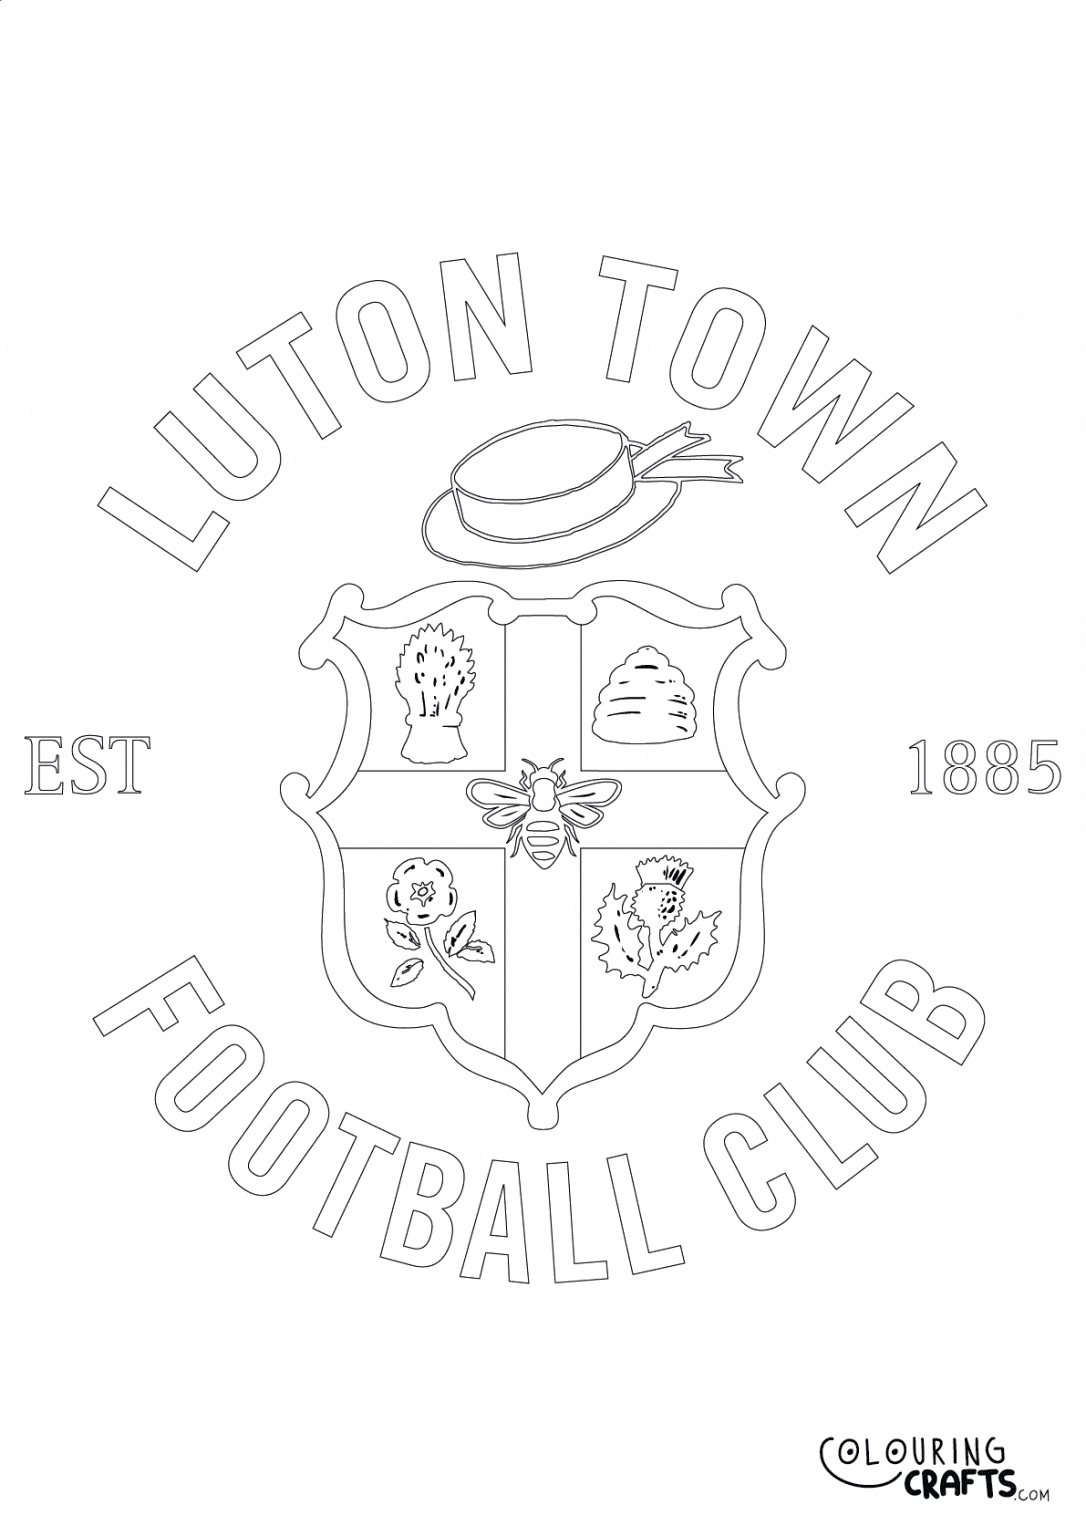 Luton Town Badge Printable Colouring Page - Colouring Crafts